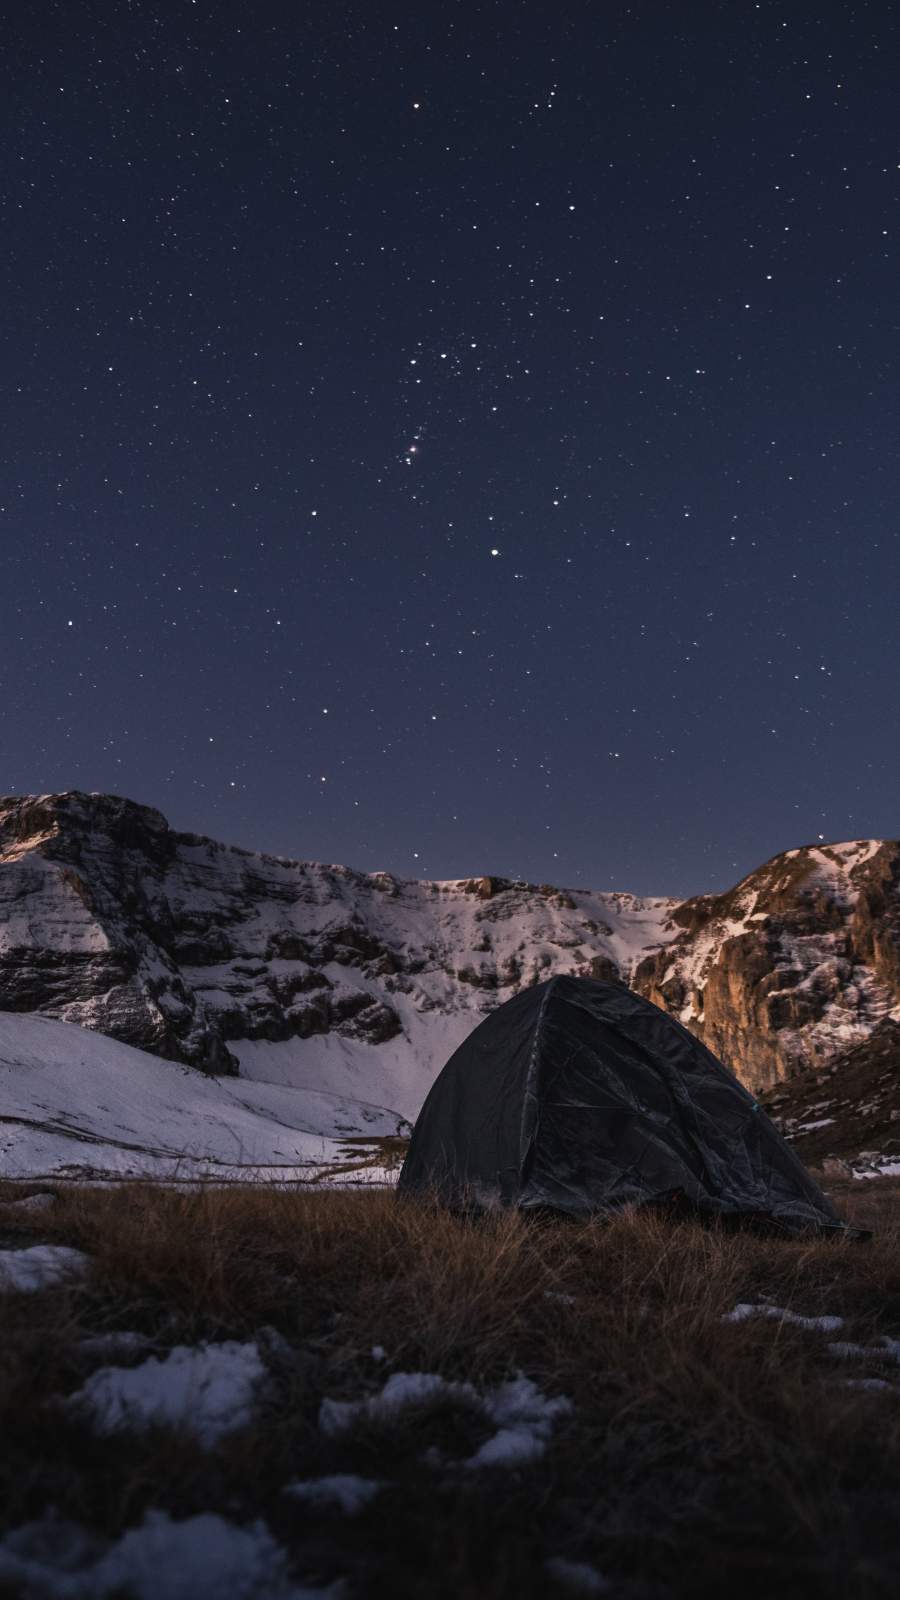 Camping in Snow Night